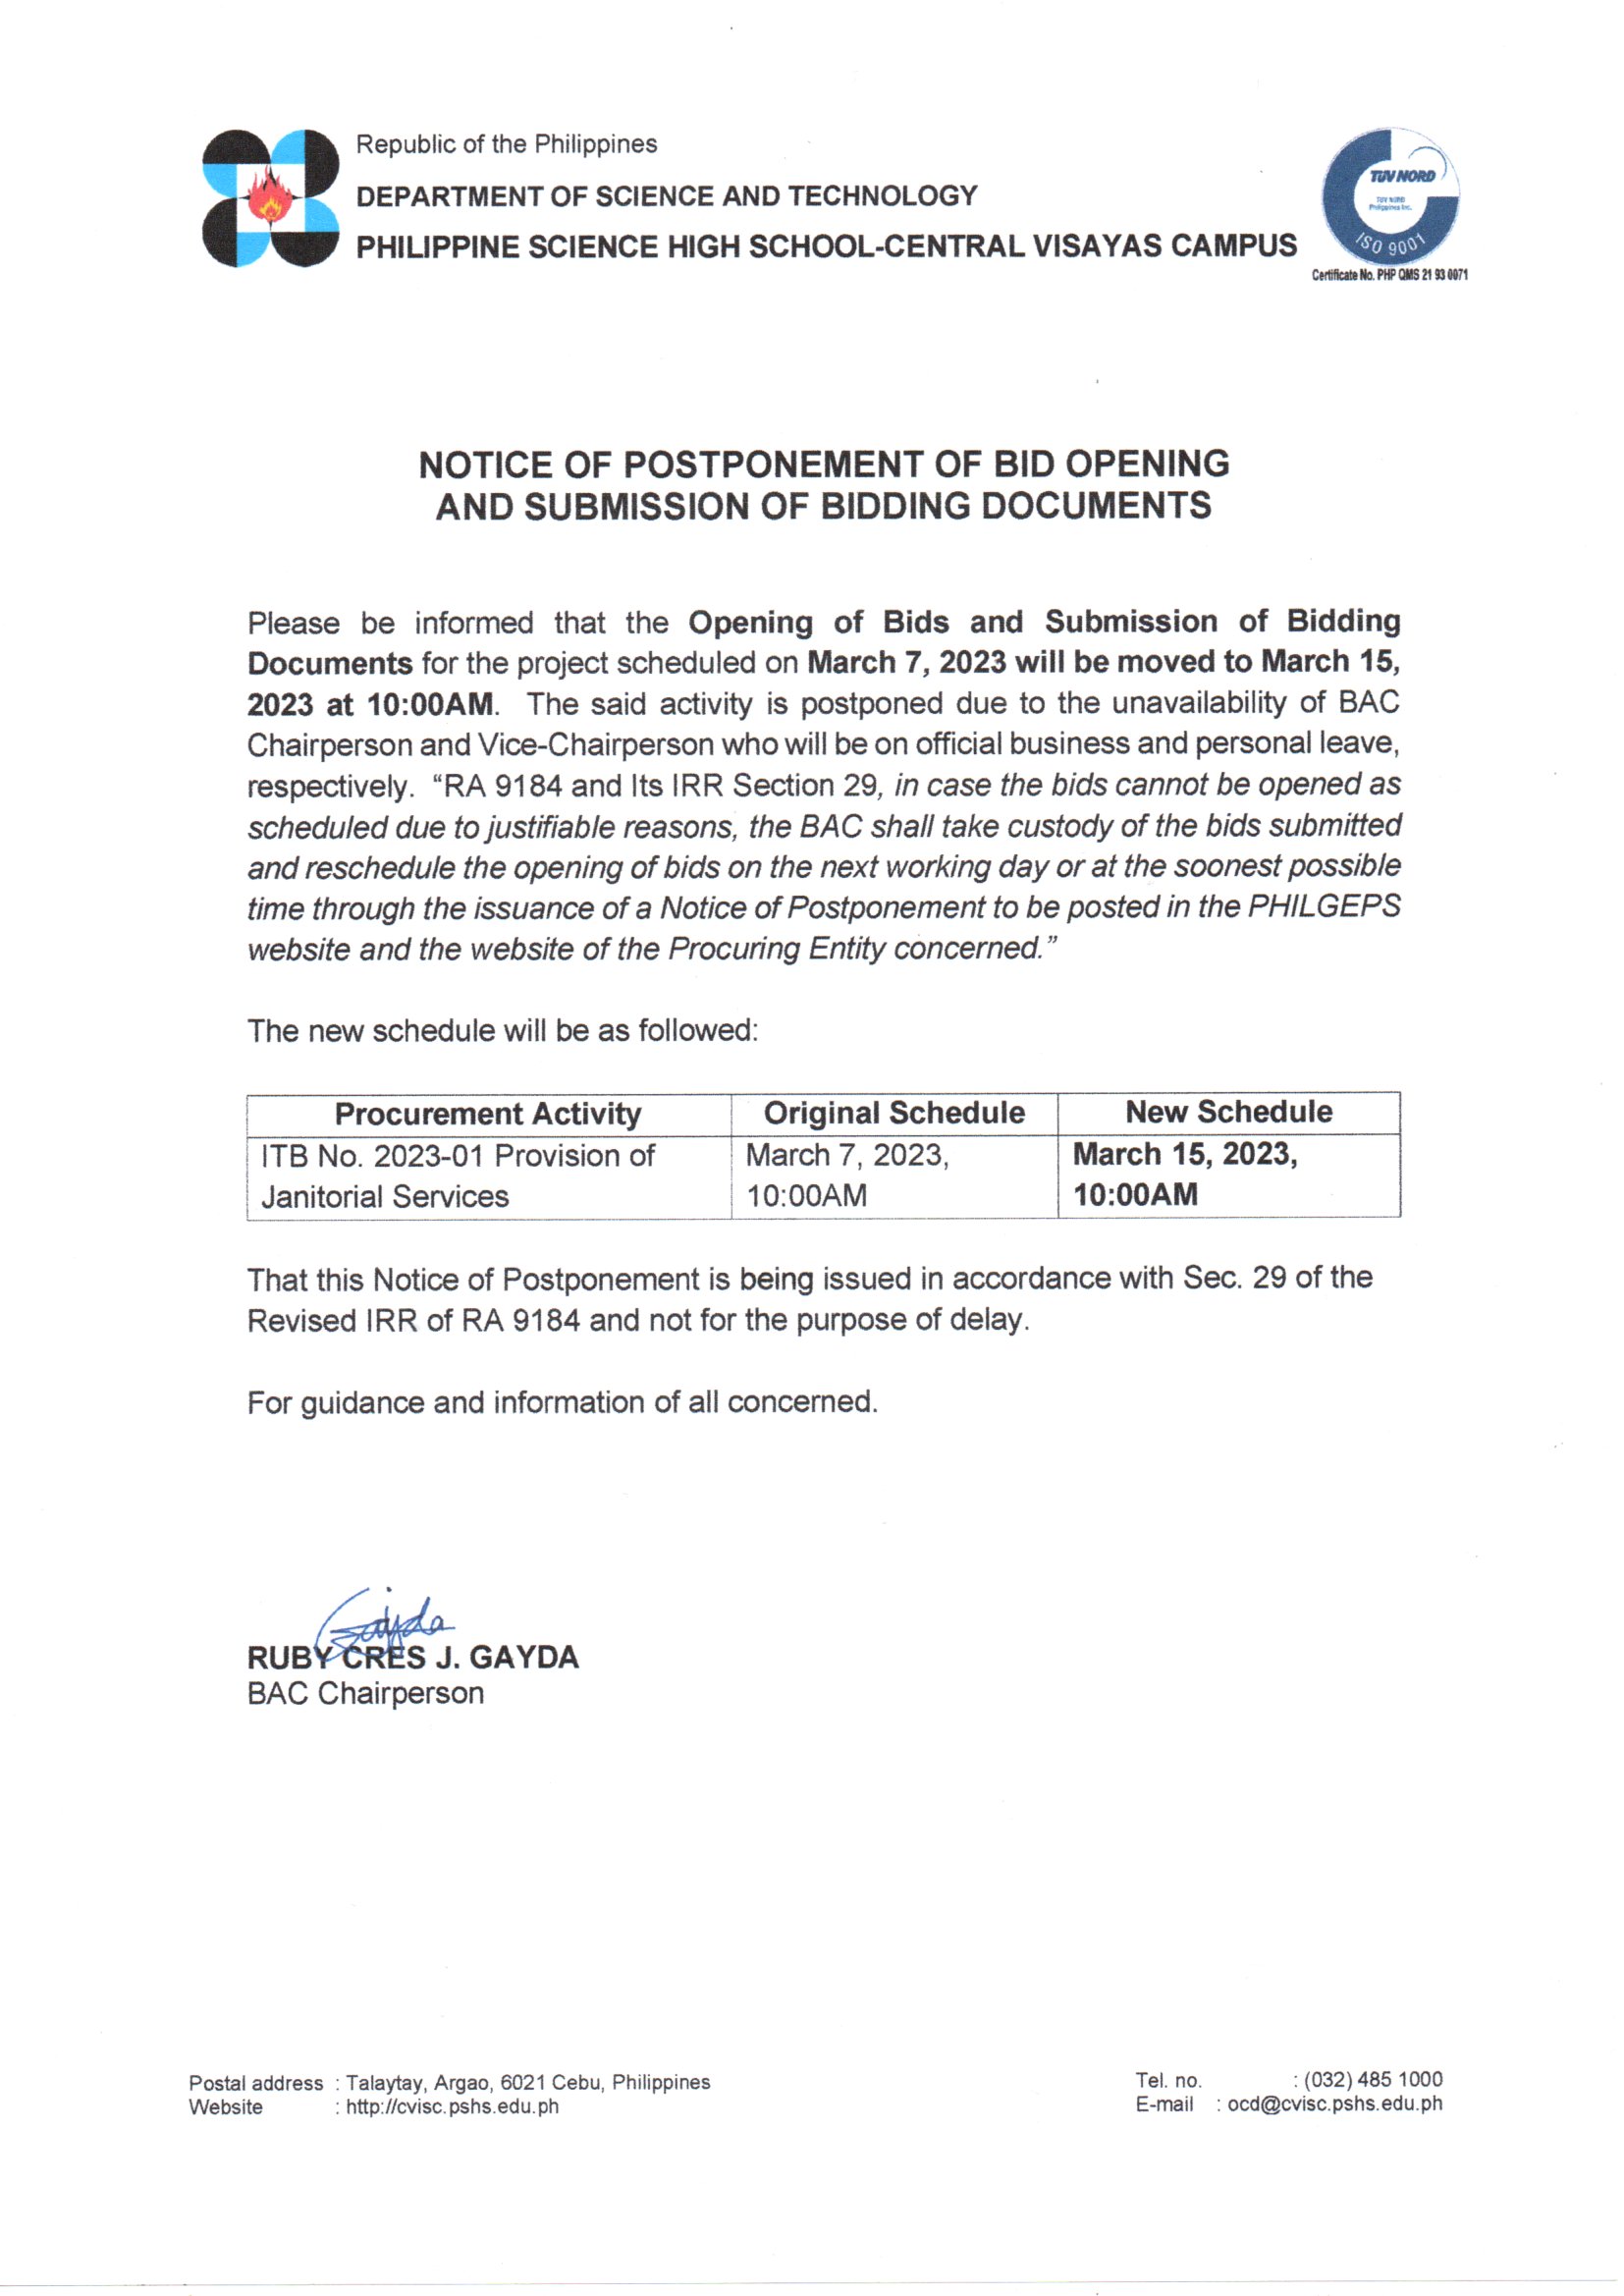 notice postponement of bid opening provision janitorial services